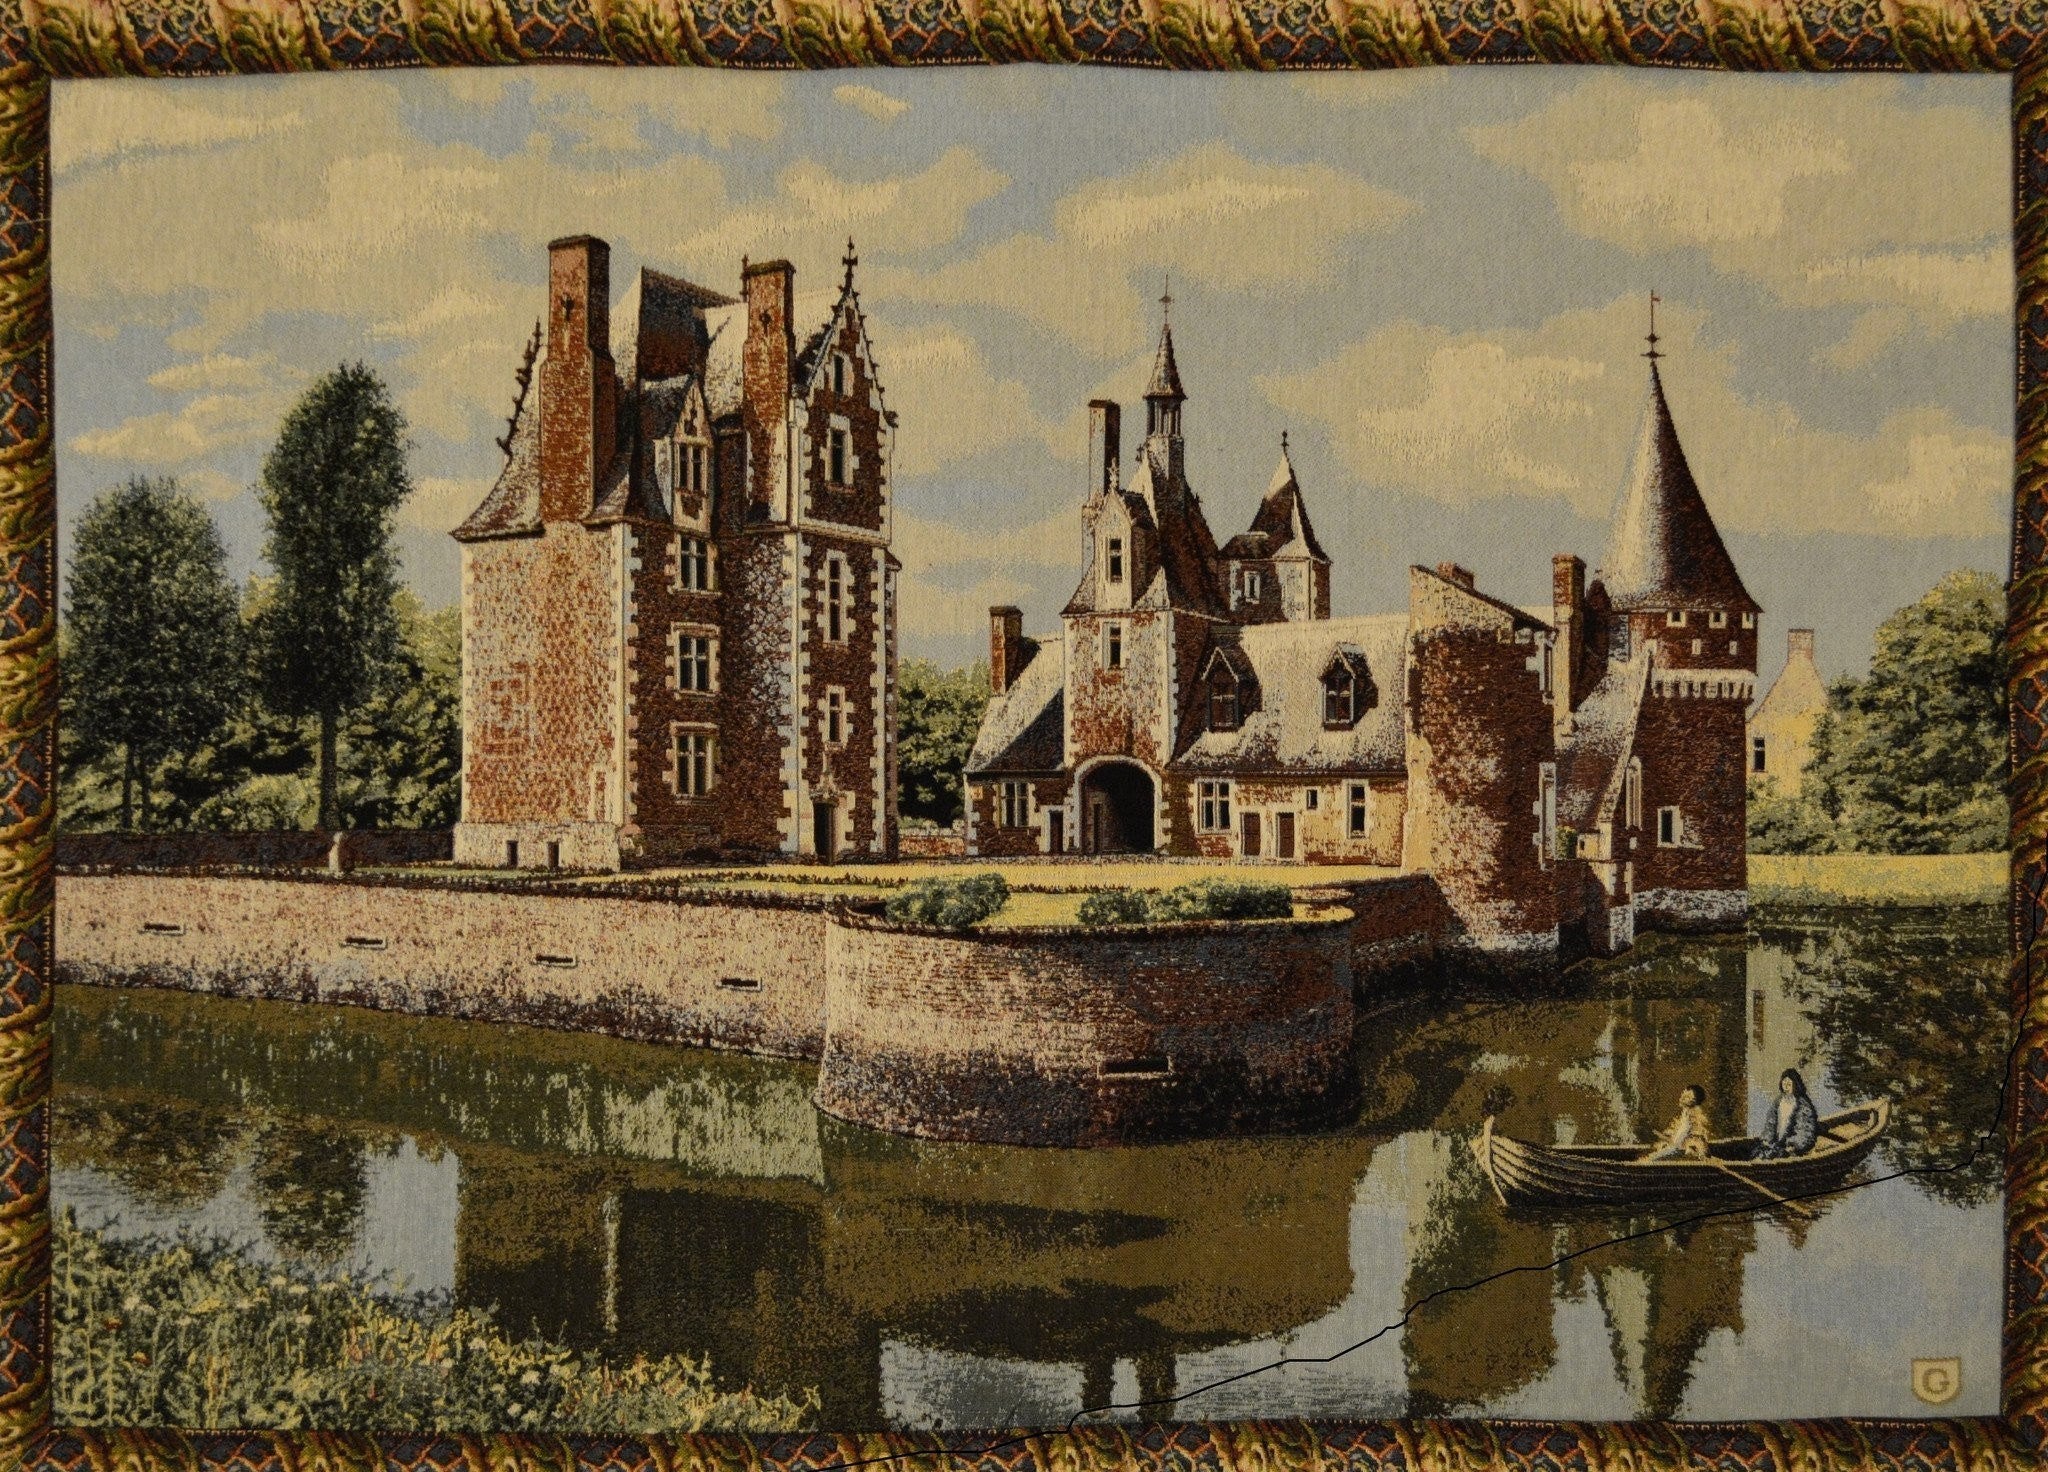 Tache Tapestry Victorian Summertime Manor Landscape Woven Wall Hanging (3562HL2) - Tache Home Fashion